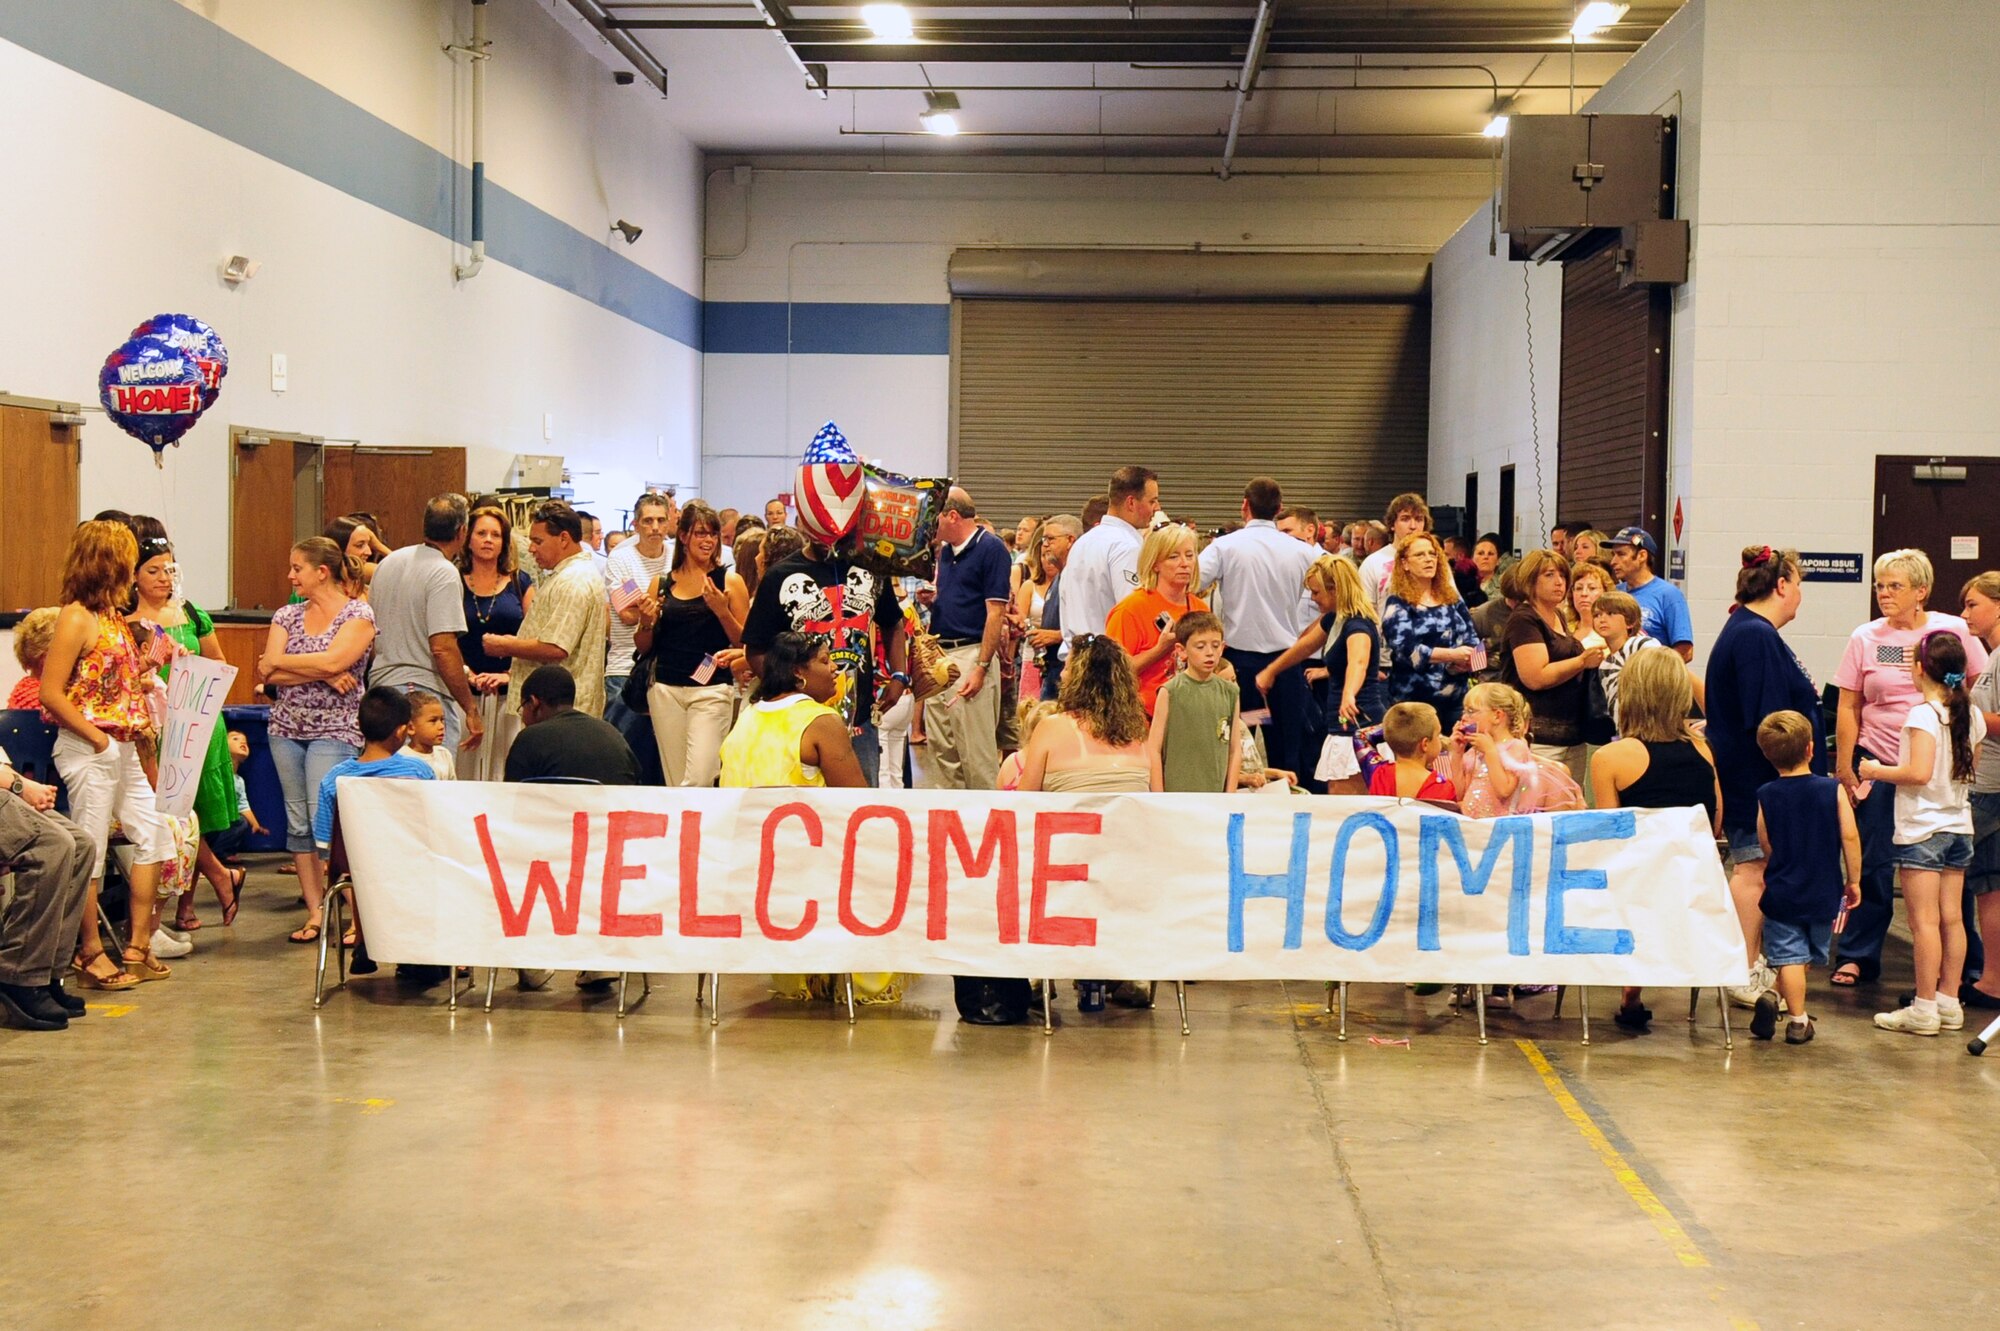 Families wait to lovingly welcome deployers home at bldg. 430 Monday. Families and base leadership came together to greet returning Airmen and show appreciation for their sacrifice. (U.S. Air Force photo by Senior Airman Steele Britton)